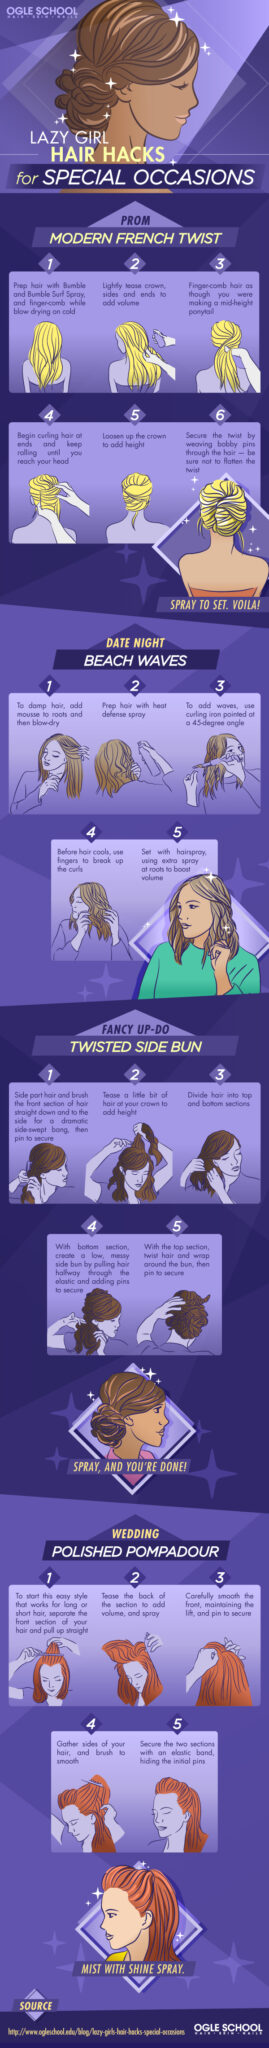 Lazy Girl Hair Hacks for Special Occasions_IG-1D